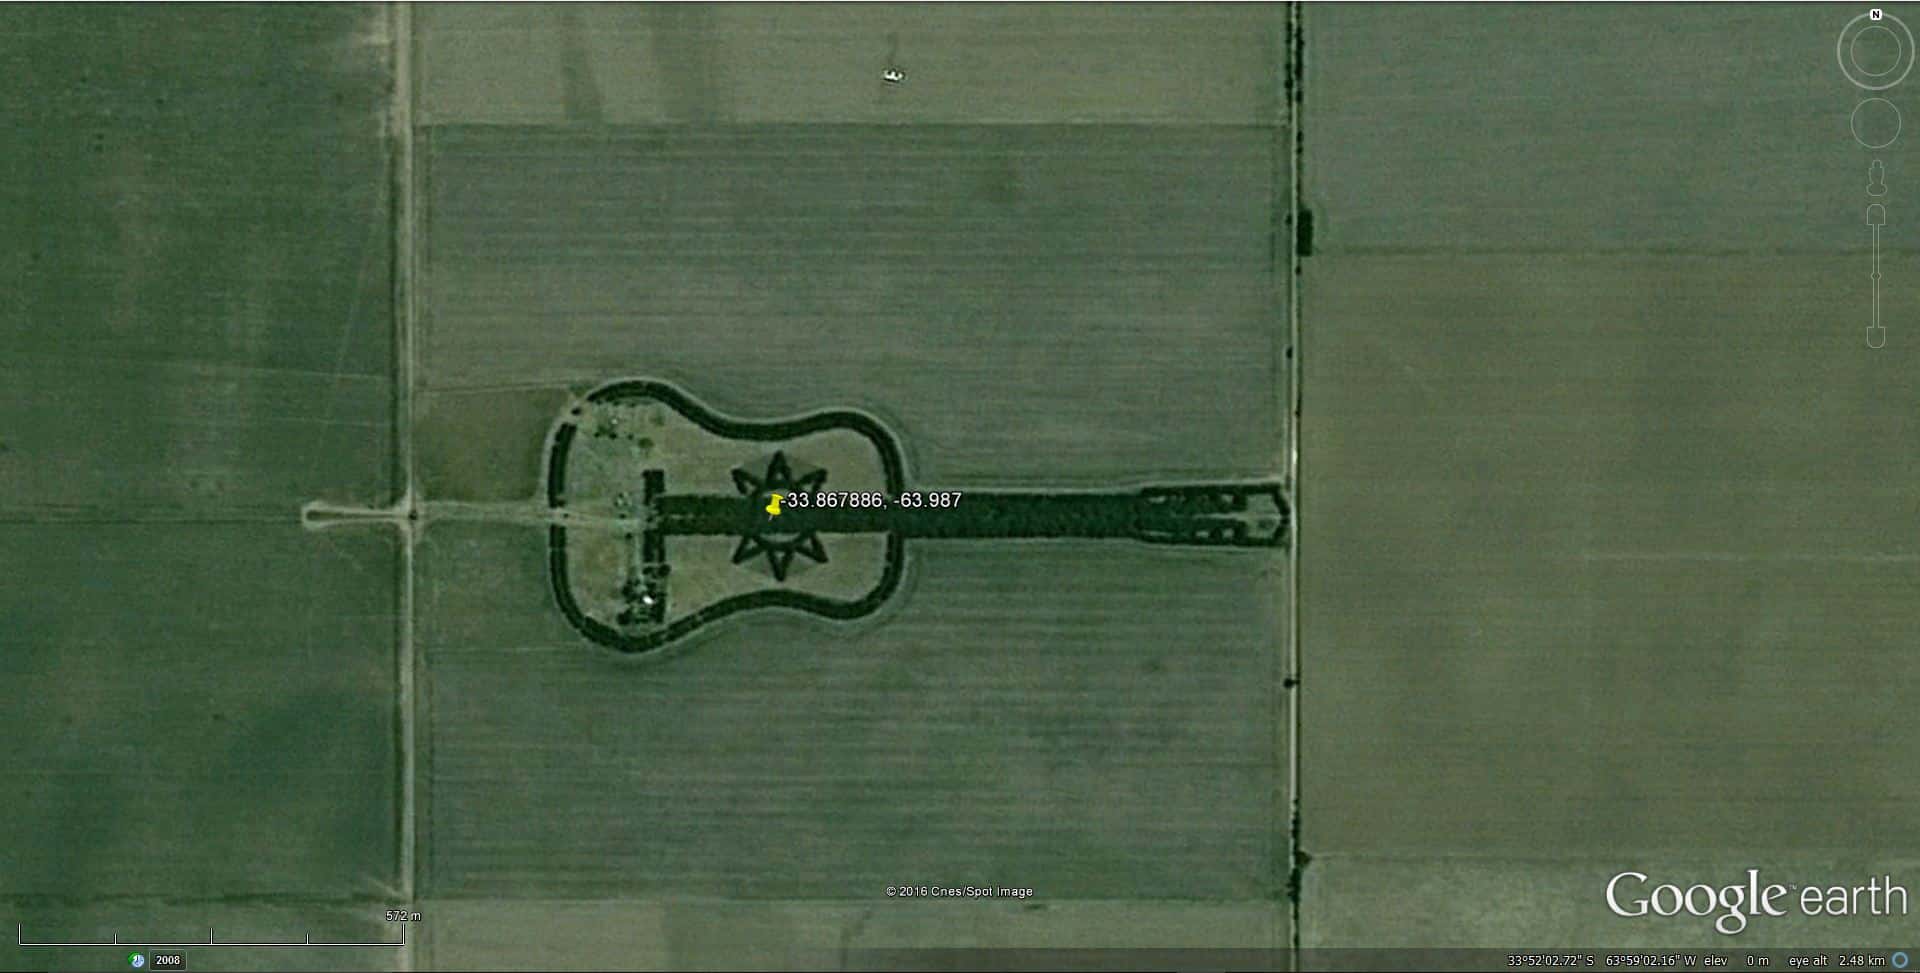 Giant Guitar Shaped Field, Argentina